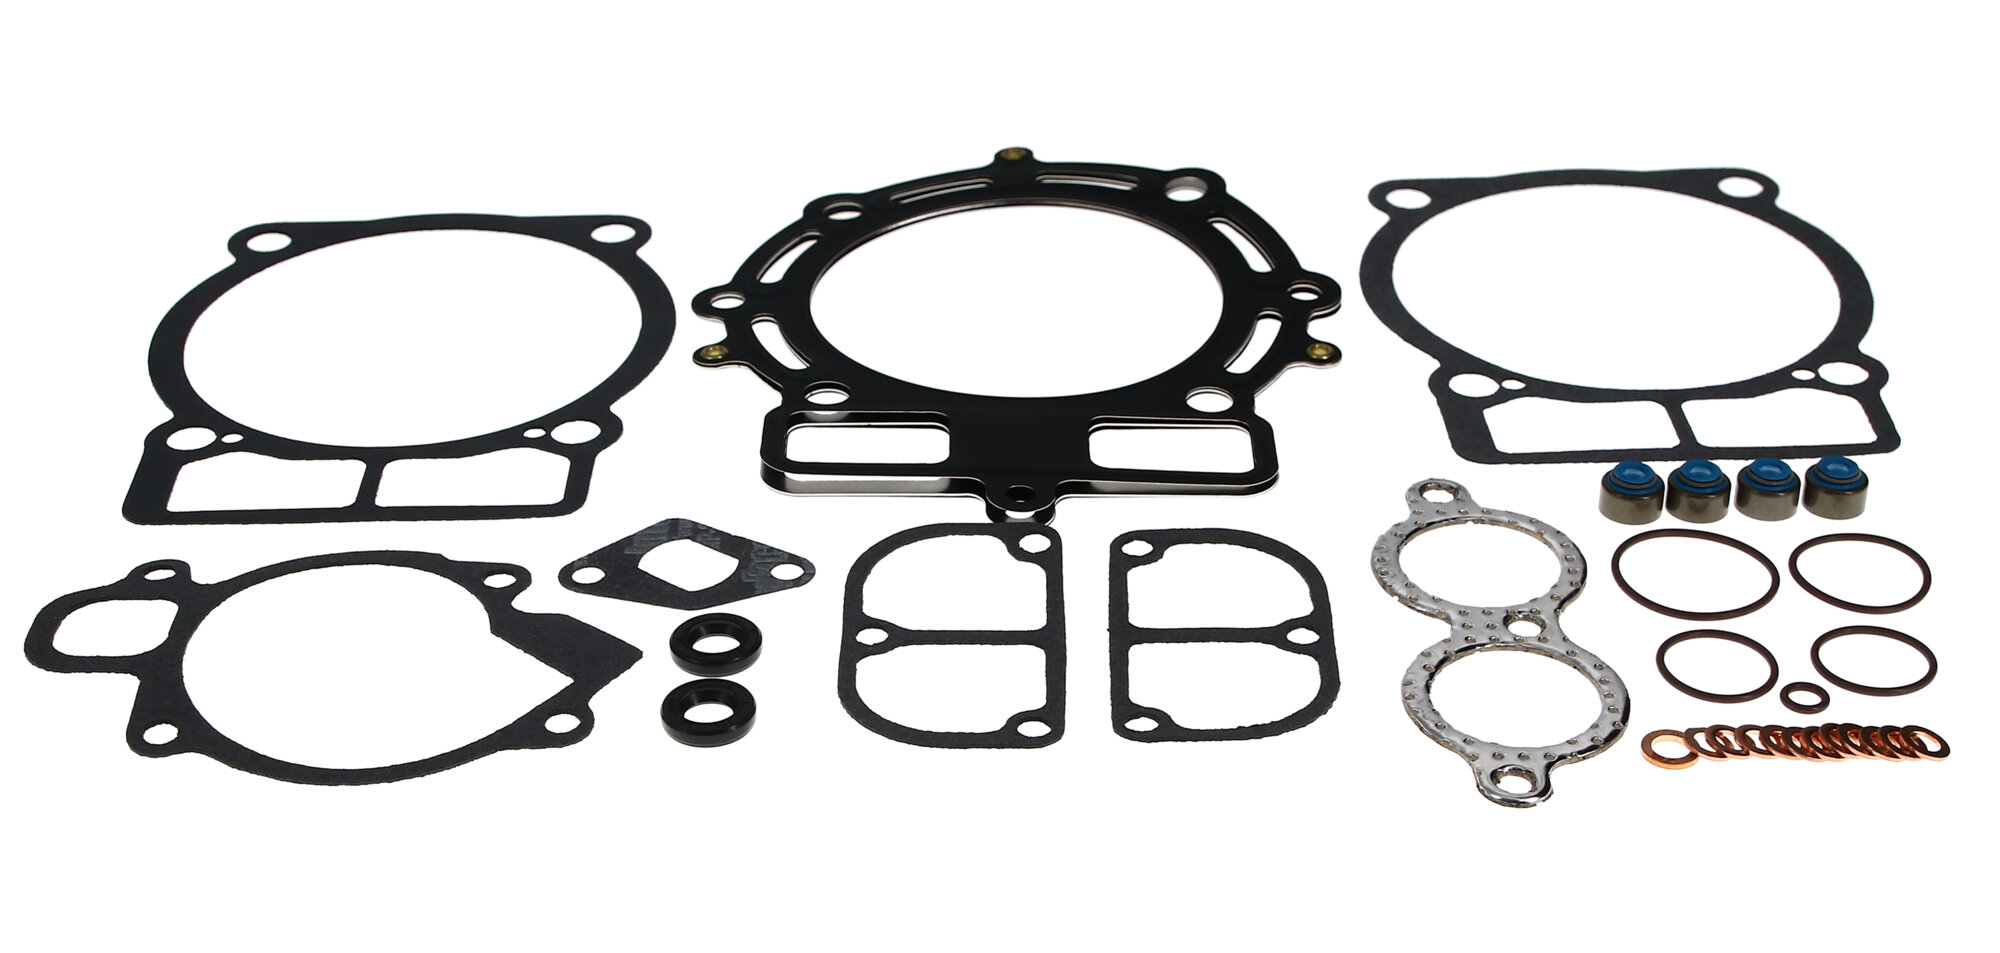 Shop High Quality Wiseco Top End Gasket Kit Top End Gasket Kits - Wiseco  SKU W5742